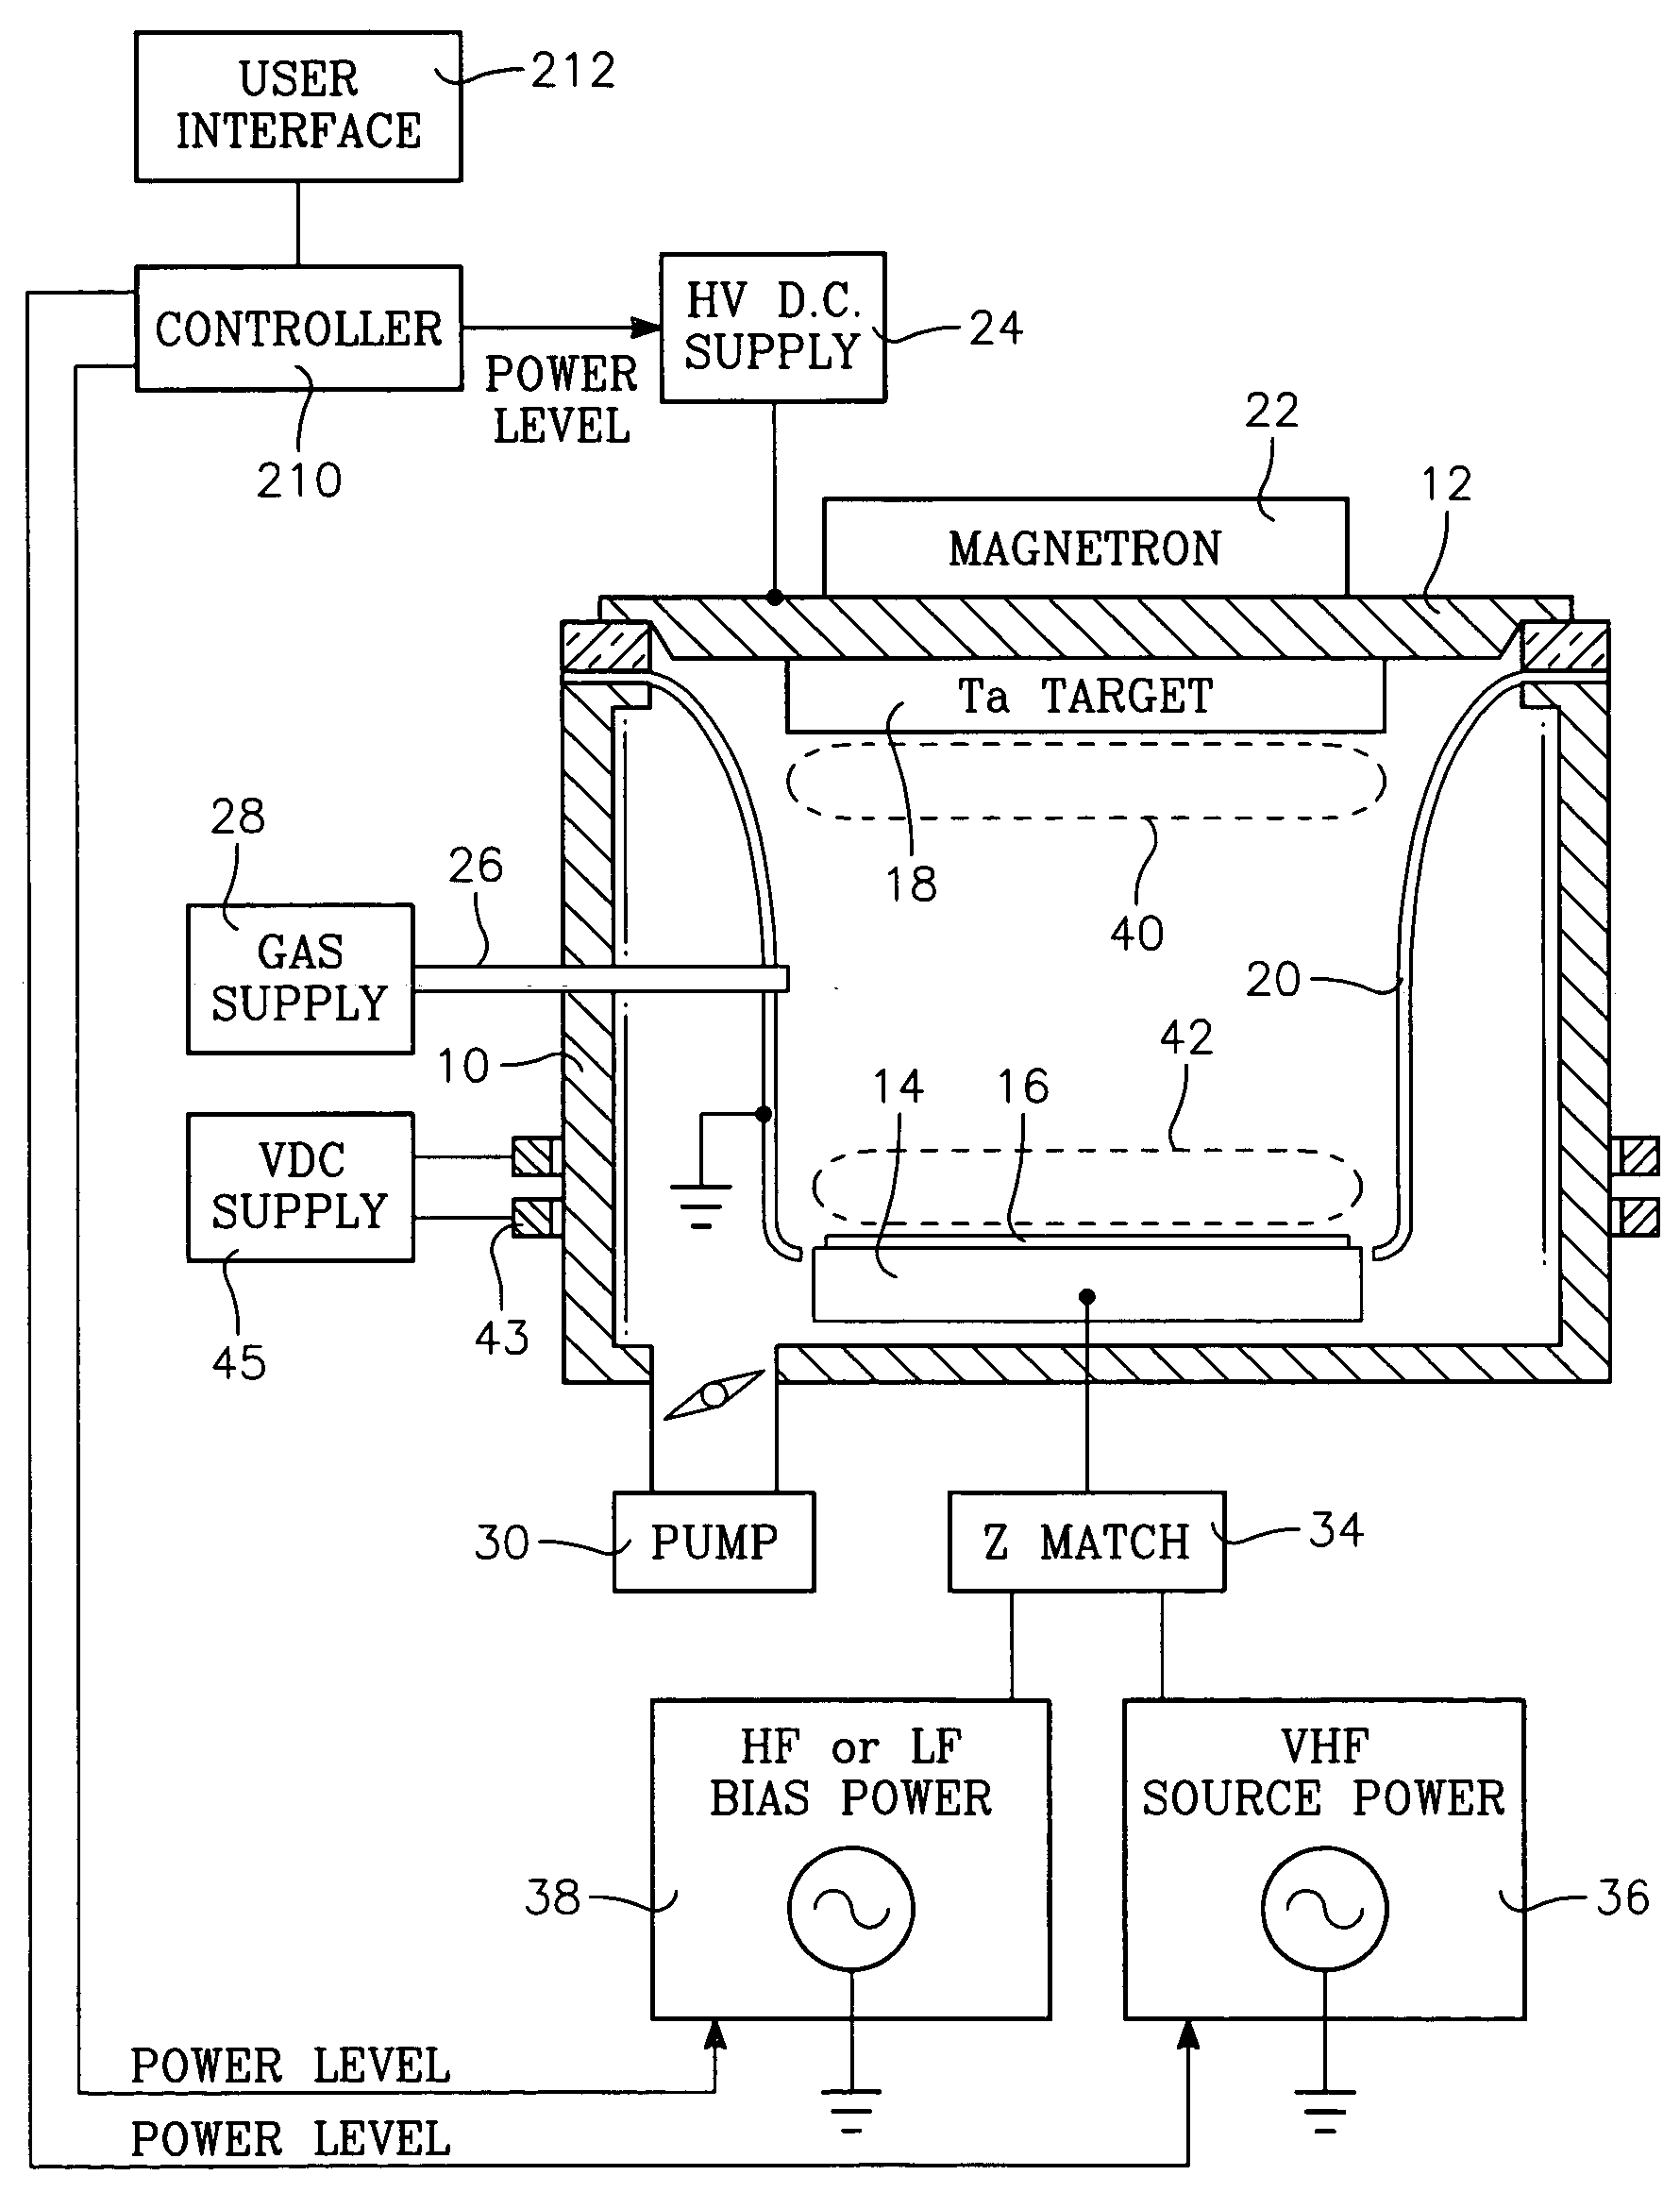 Apparatus for plasma-enhanced physical vapor deposition of copper with RF source power applied through the workpiece with a lighter-than-copper carrier gas